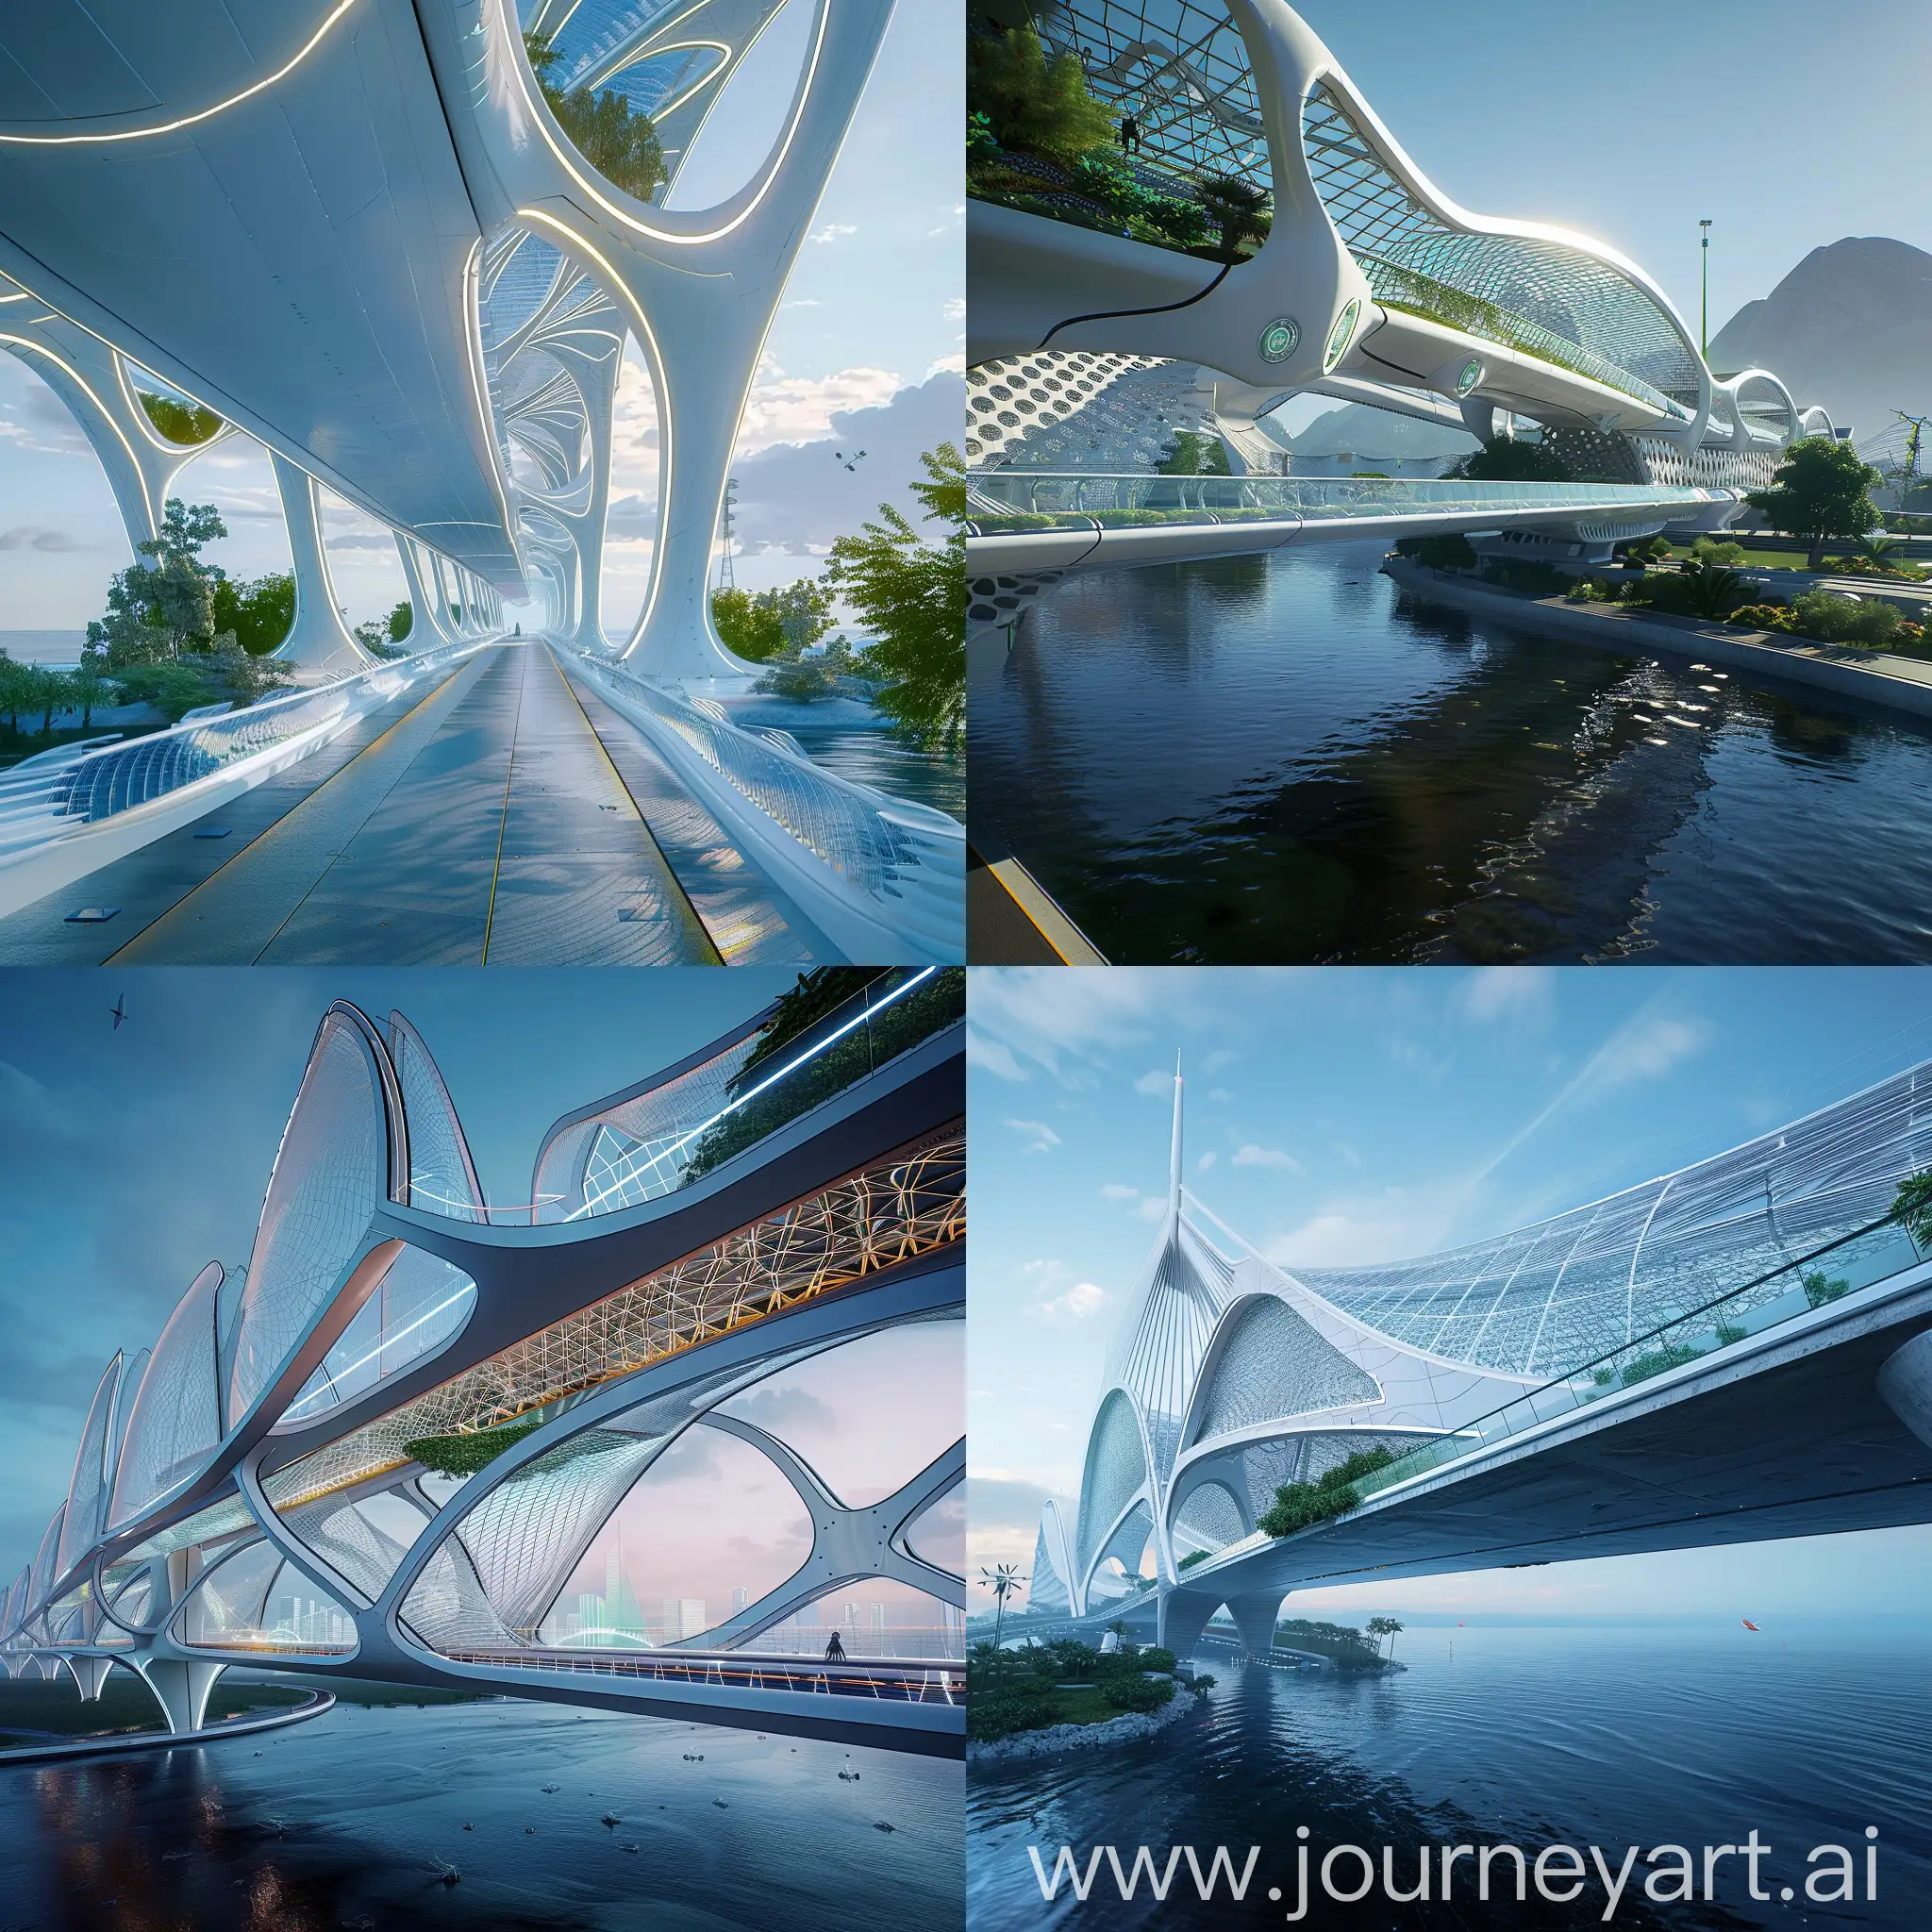 Futuristic bridge, in futuristic style, Smart Sensors, Self-Healing Materials, Integrated Energy Harvesting, Advanced Lighting Systems, Dynamic Traffic Management, Integrated Communication Network, Modular Design for Expansion, Greenery Integration, Augmented Reality Navigation, Resilience to Extreme Events, Solar Panels, Dynamic Facade, Wind Turbines, Interactive Art Installations, Green Roofs, Water Harvesting Systems, Transparent Balustrades, LED Art Lighting, Aquatic Habitat Integration, Climate-Responsive Design, Advanced Composite Materials, Honeycomb Structures, Foam Core Sandwich Panels, Tensile Membrane Structures, Additive Manufacturing (3D Printing), Truss Systems, Folded Plate Structures, Carbon Nanotube Reinforcement, Deployable Structures, Variable Cross-Sectional Profiles, Tensile Fabric Canopies, Transparent Nanomaterials, Carbon Fiber Reinforced Polymer (CFRP) Railings, Lightweight Cable-Stayed Supports, Solar-Integrated Photovoltaic Panels, Recyclable Composite Decking, Lightweight Cable-Net Structures, Kinetic Energy Harvesting Pavements, Foldable/Retractable Balconies, Greenery-Integrated Vertical Gardens, unreal engine 5